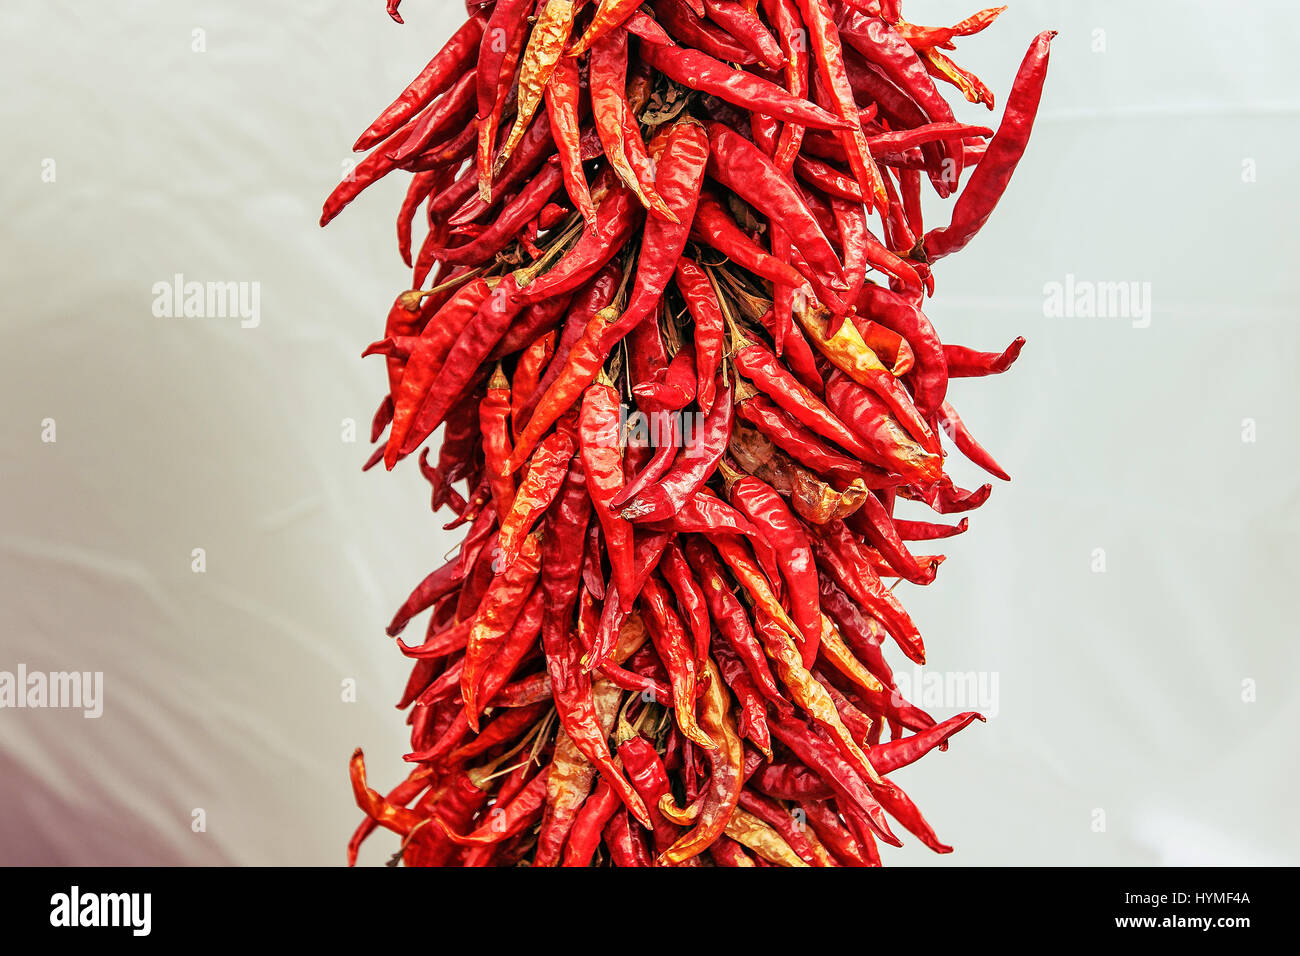 Hanging bunch of cayenne pepper. Stock Photo